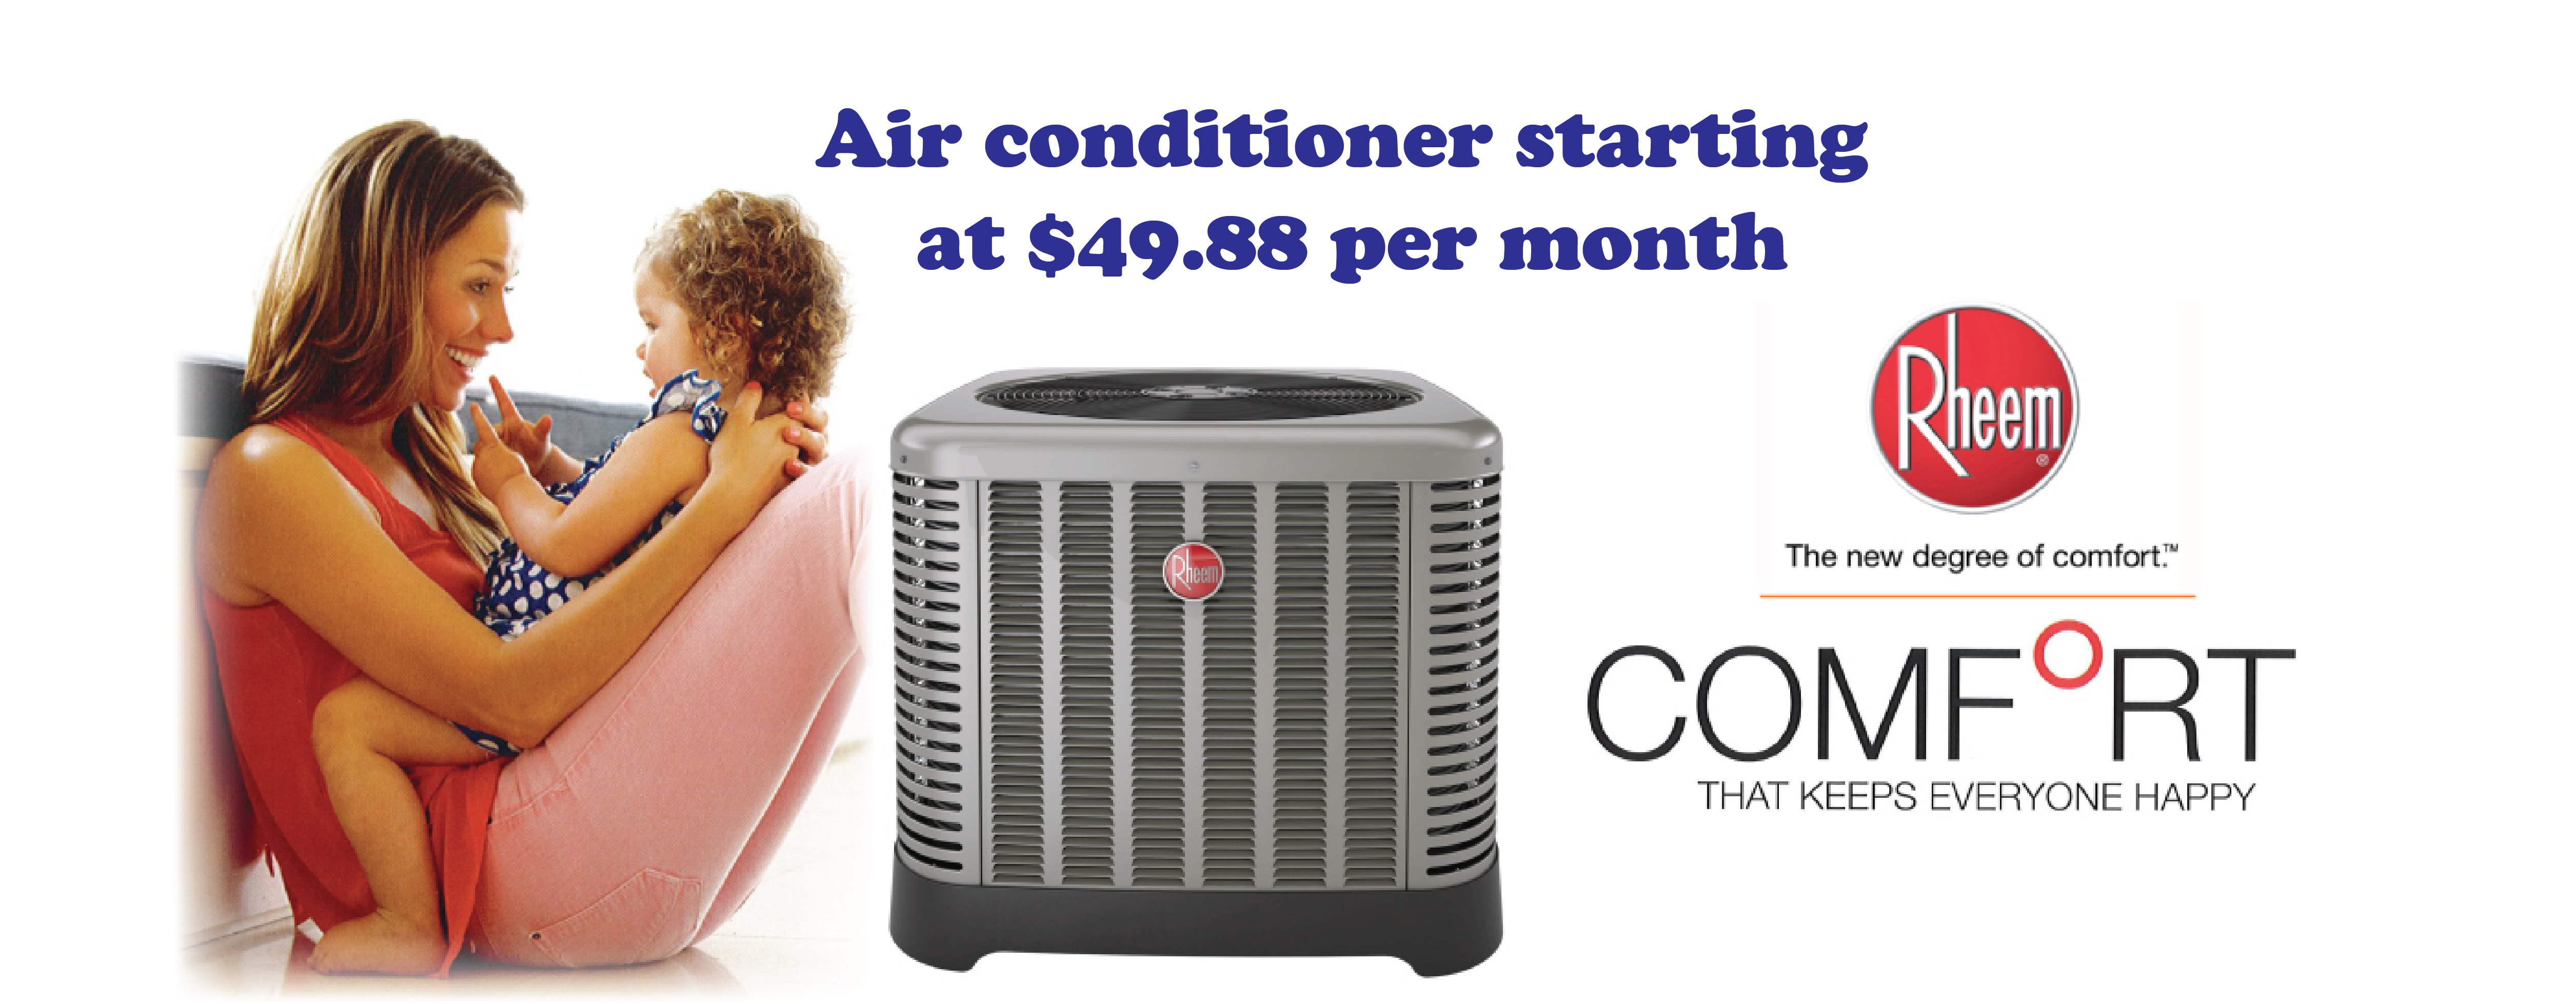 Marc Viau Mechanical, Cornwall, Rheem Air Conditioner For your comfort